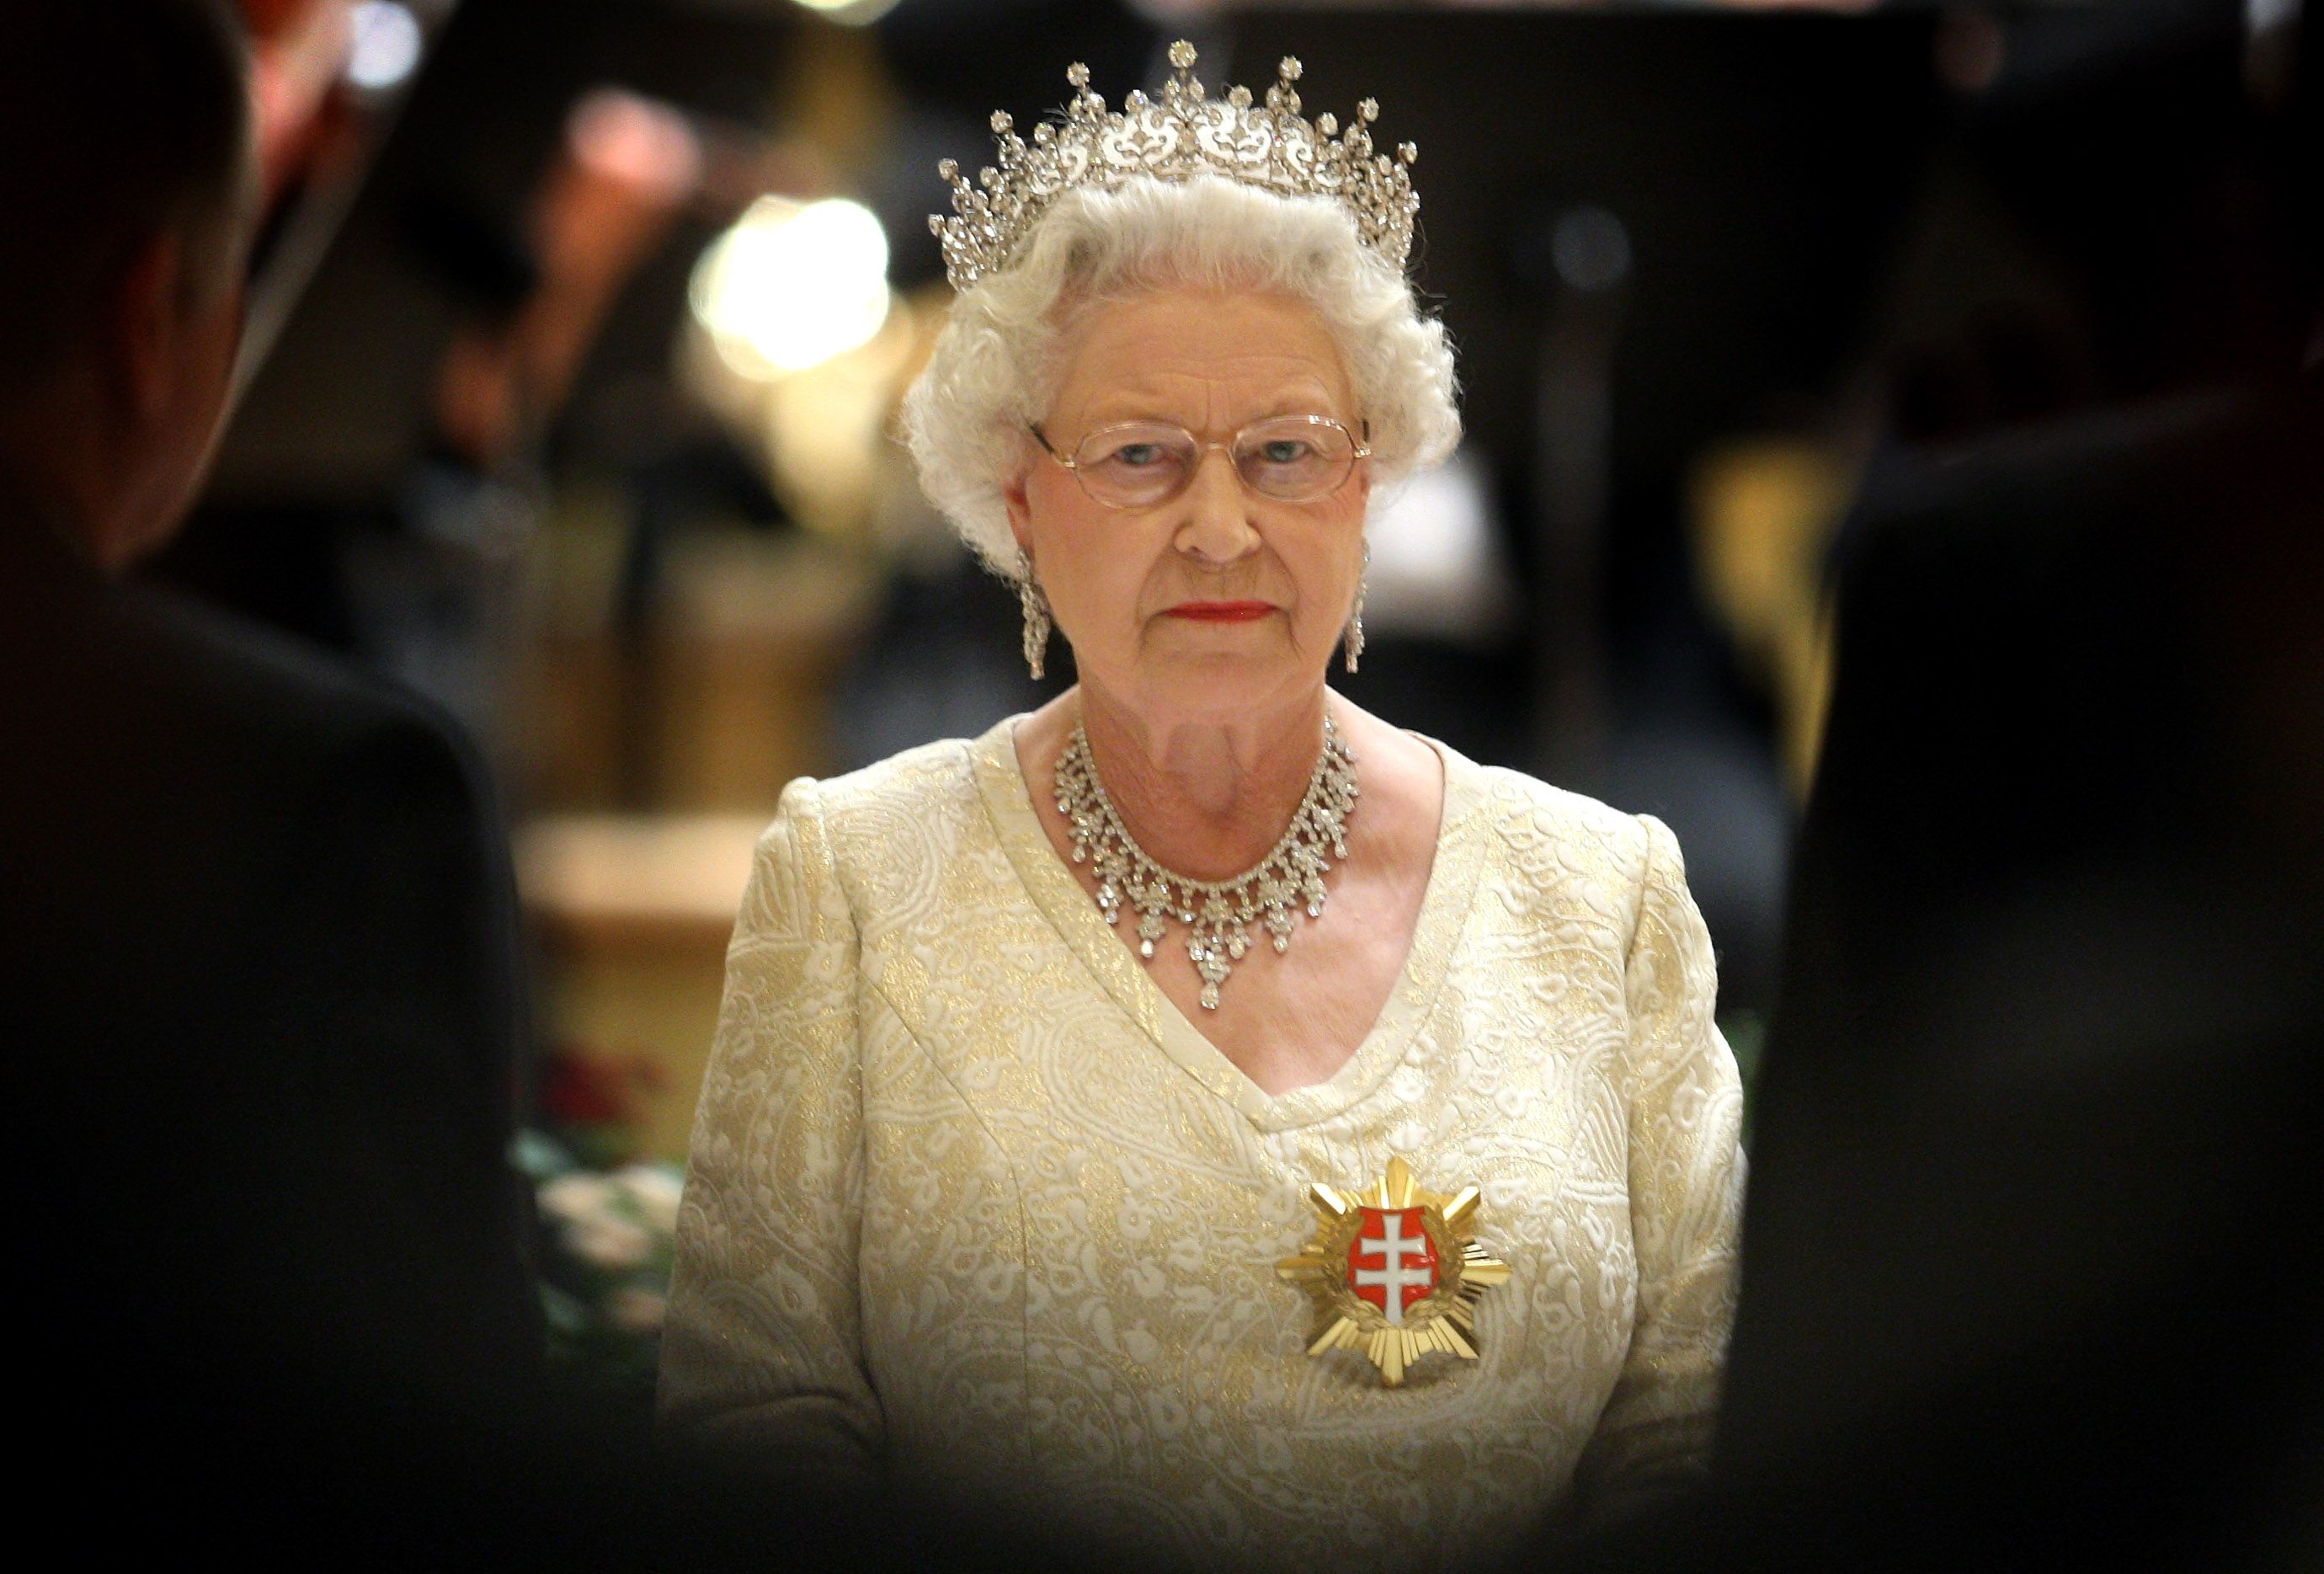 Queen Elizabeth II attends a State Banquet at the Philharmonic Hall on the first day of a tour of Slovakia on October 23, 2008 | Photo: Getty Images 